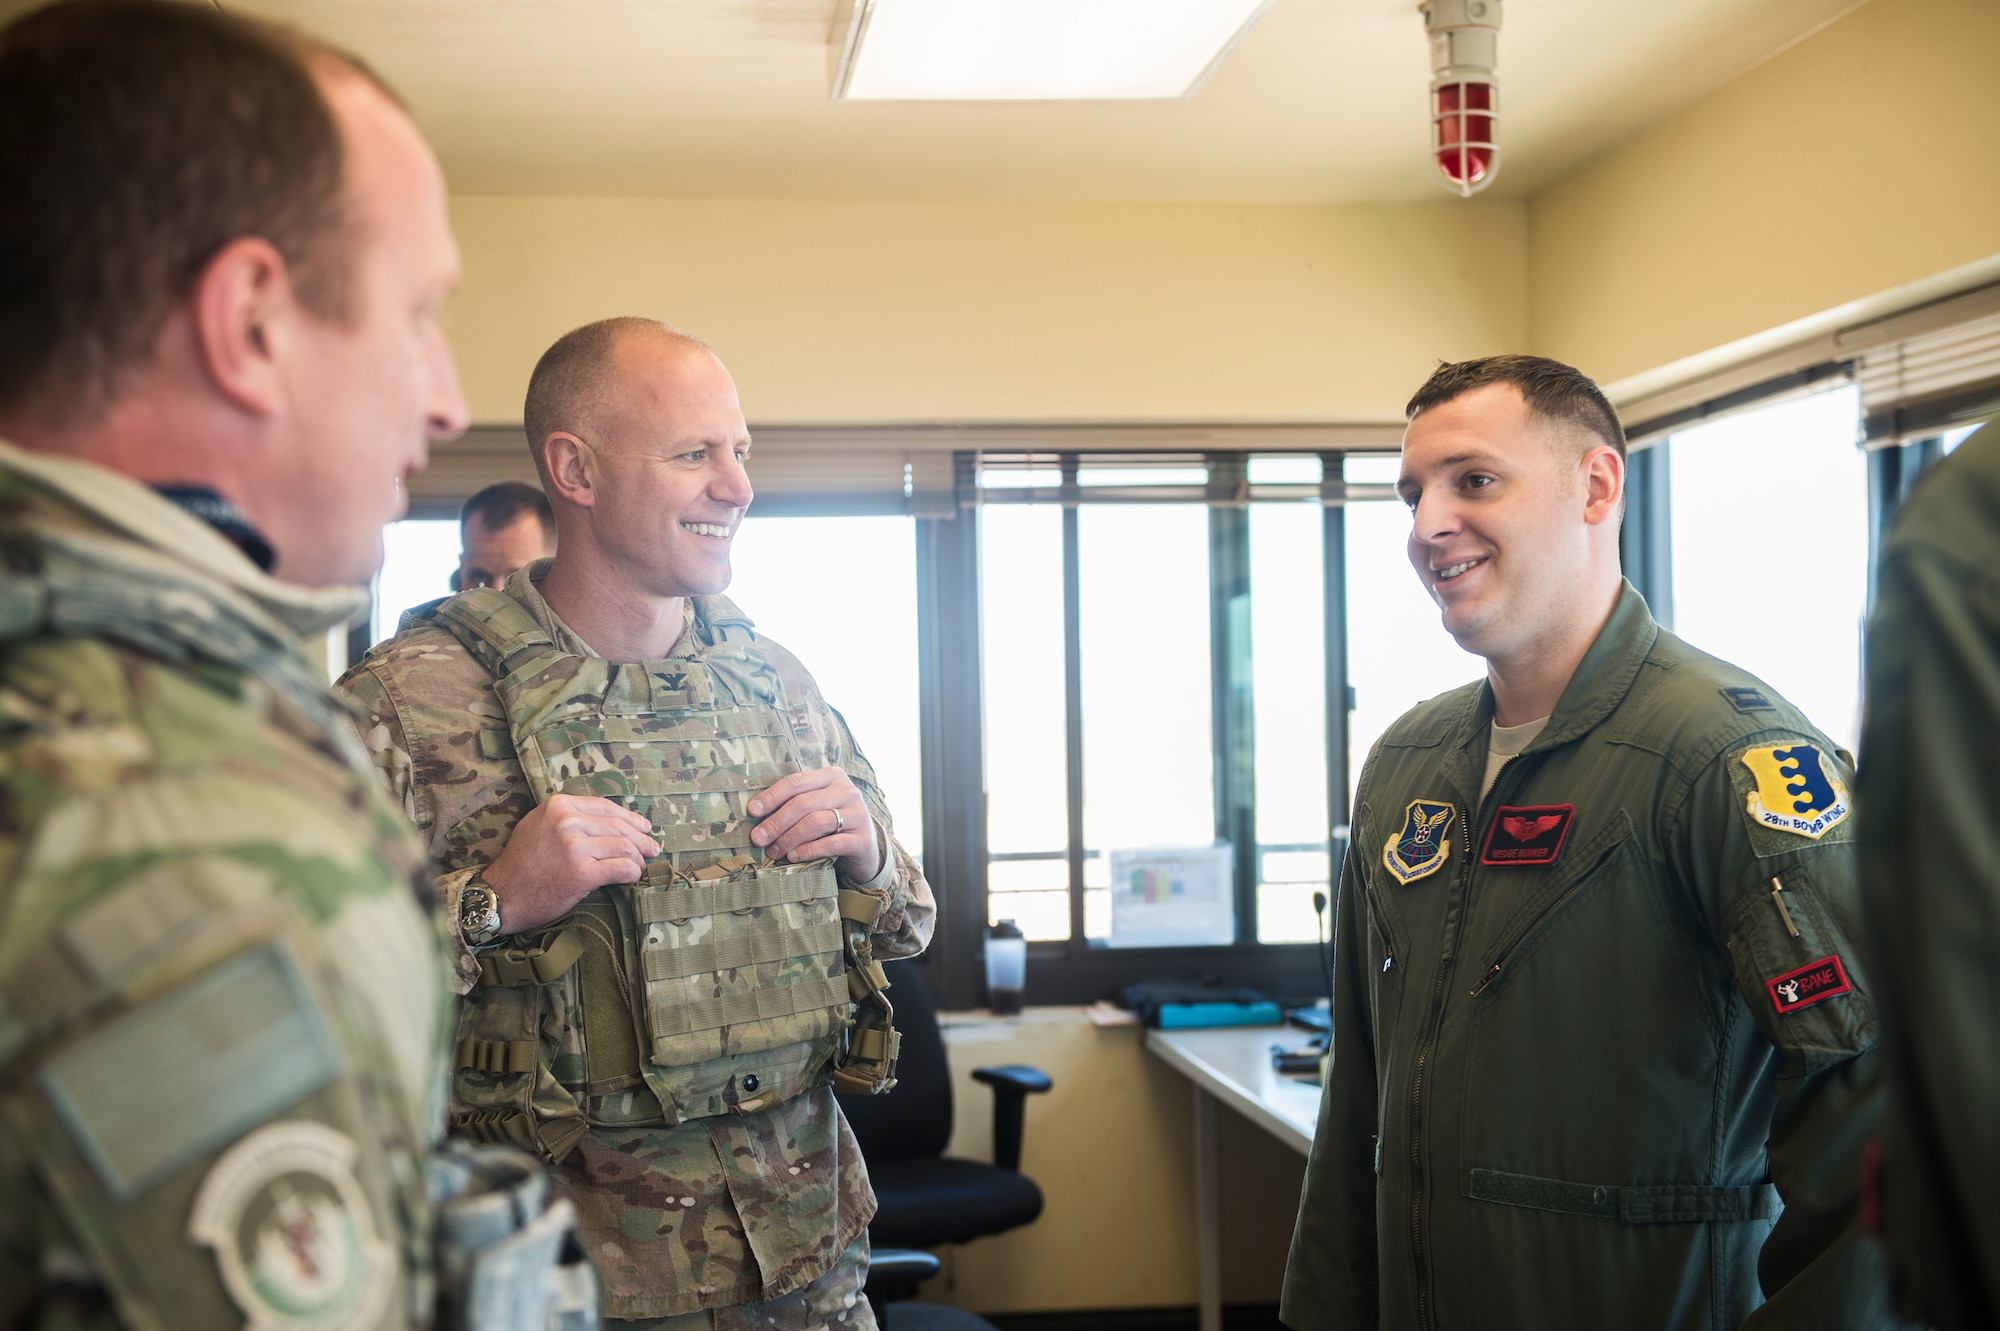 U.S. Air Force Capt. Anthony Bunker, 34th Bomb Squadron, shares a laugh with Col. Joseph Locke, 93d Air Ground Operations Wing commander, and Lt. Col. Steve Raspet, 7th Air Support Operations Squadron commander, Feb. 4, 2016, at the Oro Grande Training Complex at Fort Bliss, Texas. Locke had the opportunity to meet the Airmen and U.S. Army Soldiers participating in the exercise as well as the key leaders. (U.S. Air Force photo by Senior Airman Olivia Dominique/Released)